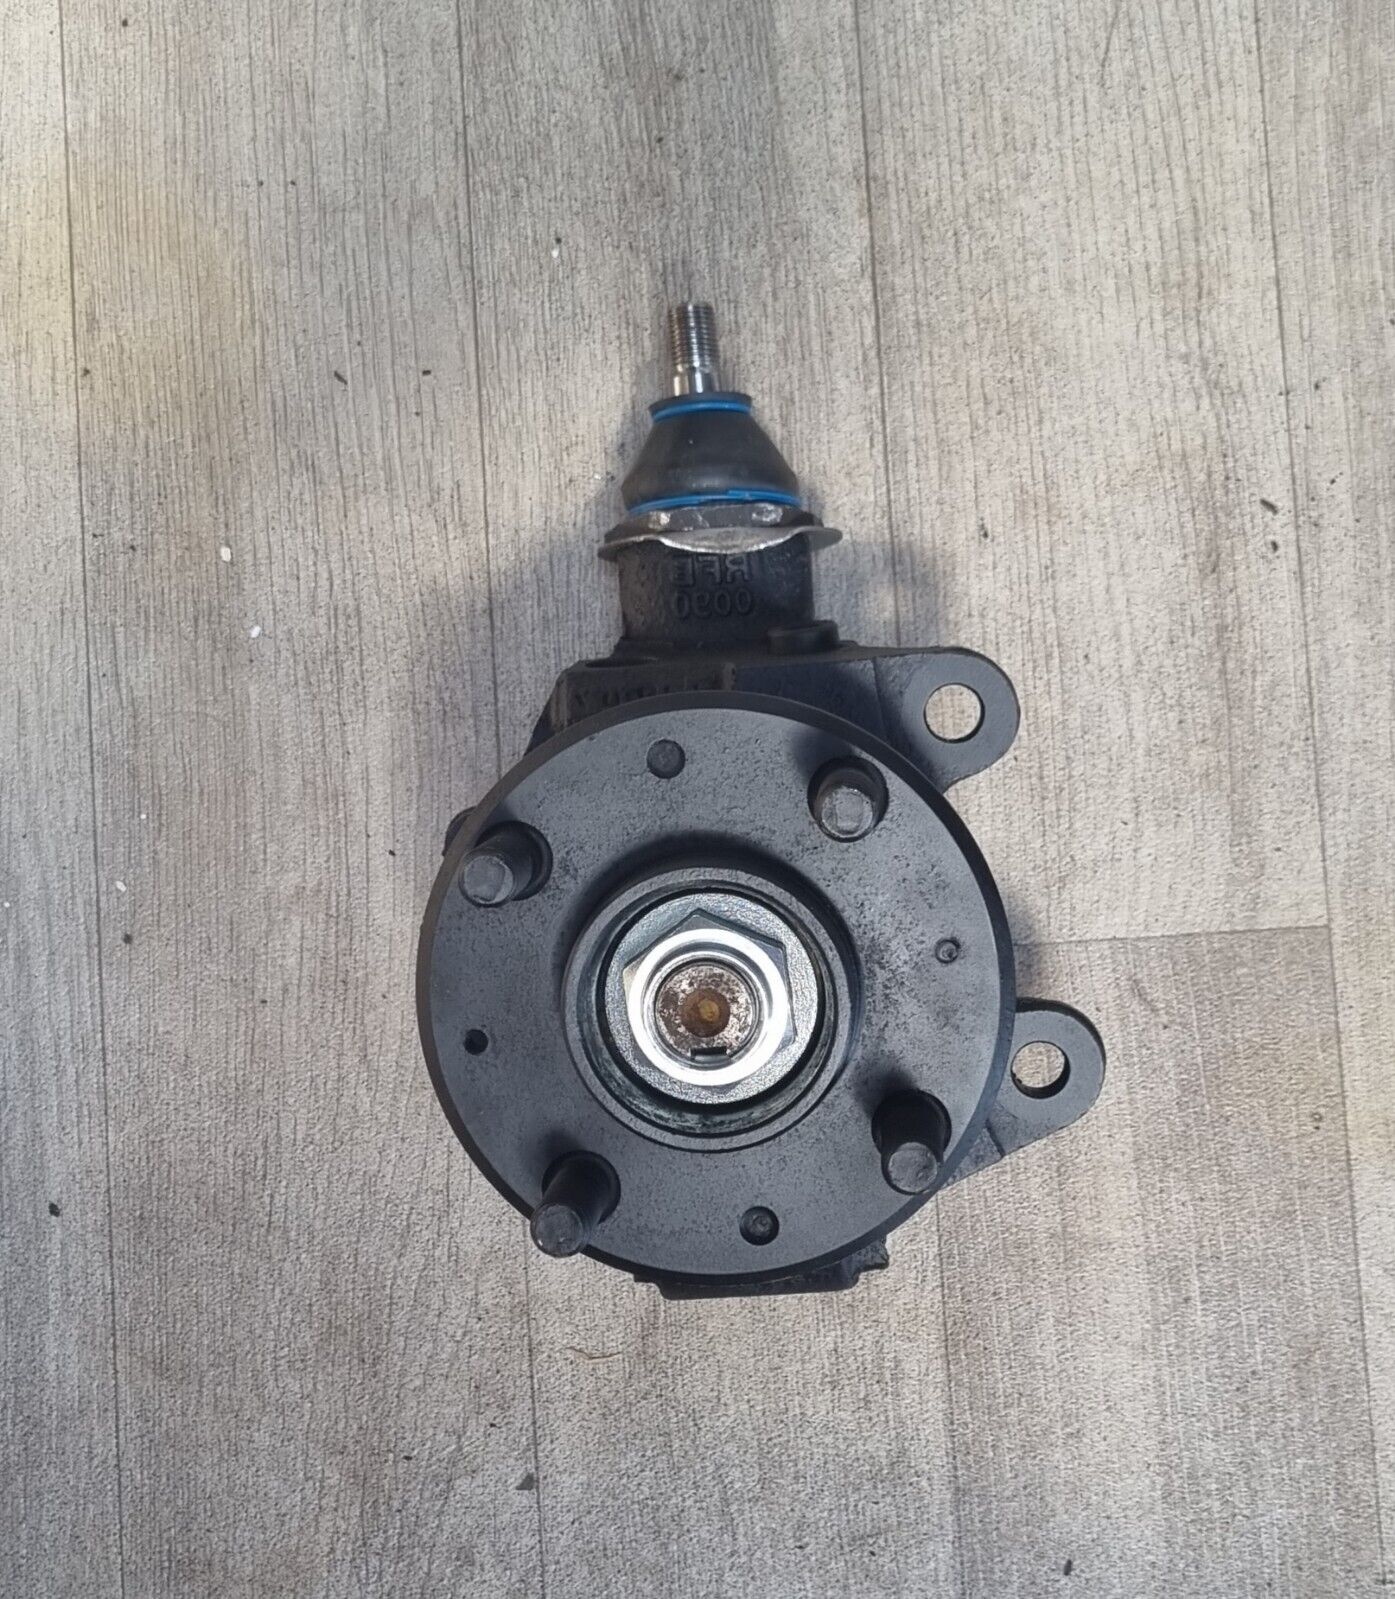 Refurbished MGF Offside Drivers Right Front Wheel Hub RFB000200. NON ABS